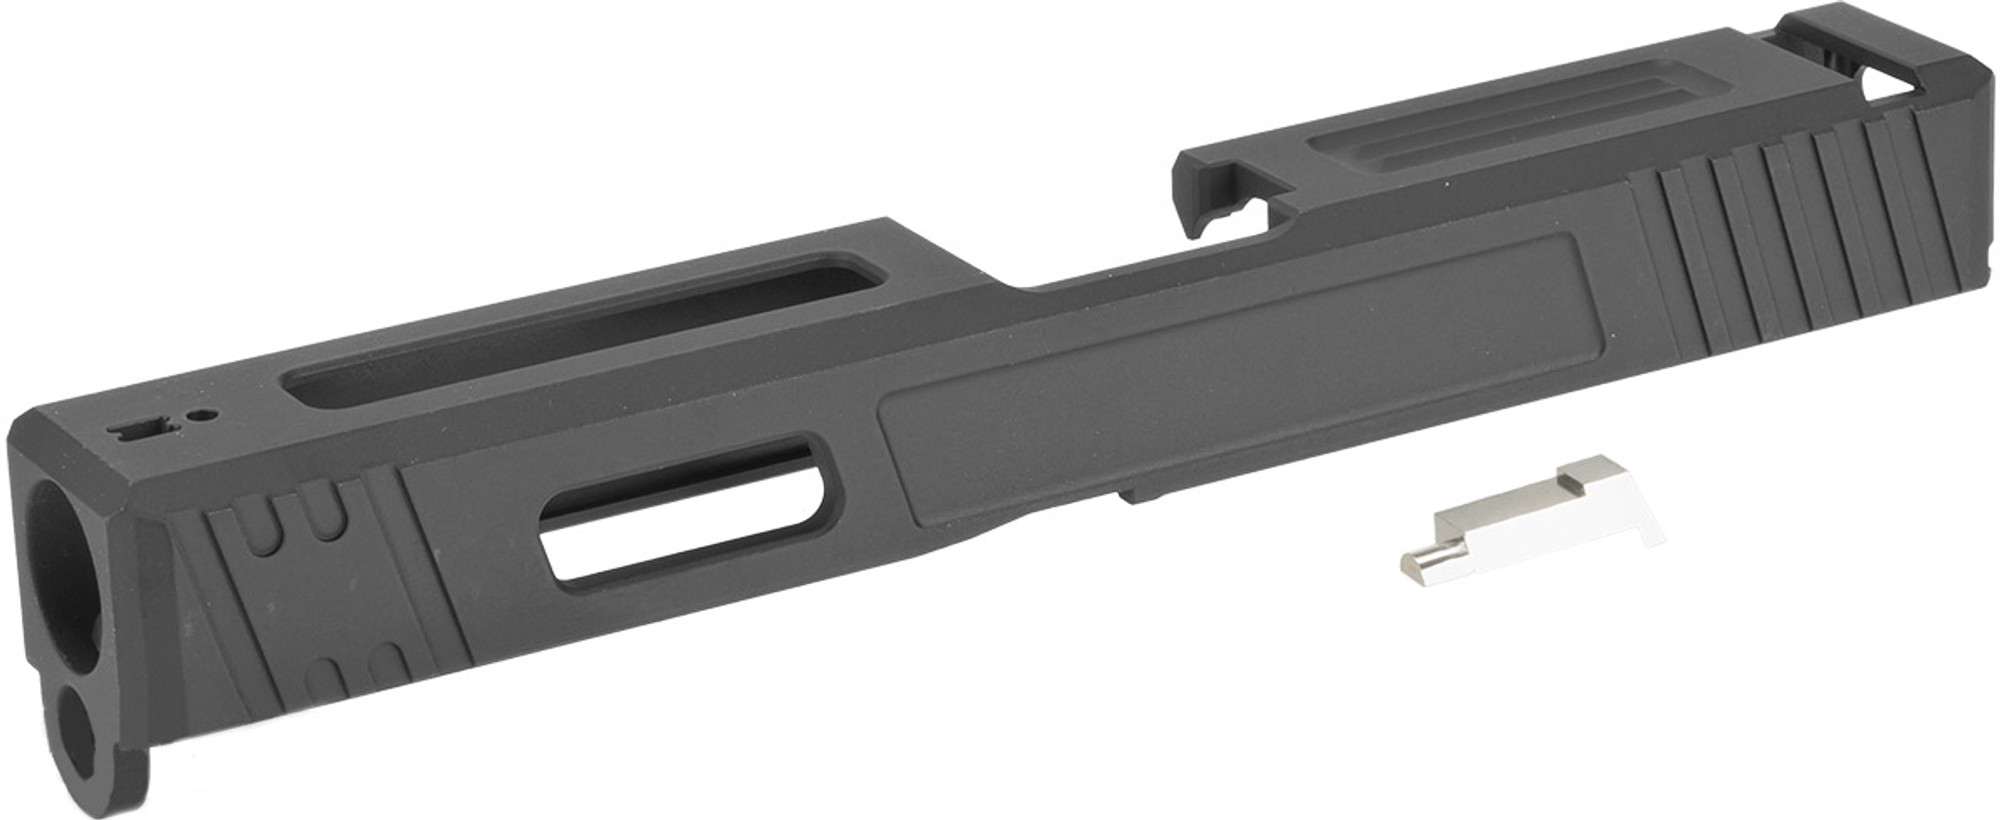 Legacy CNC Machined Aluminum Alloy Slide for APS A-CAP CO2 Powered Airsoft Pistols